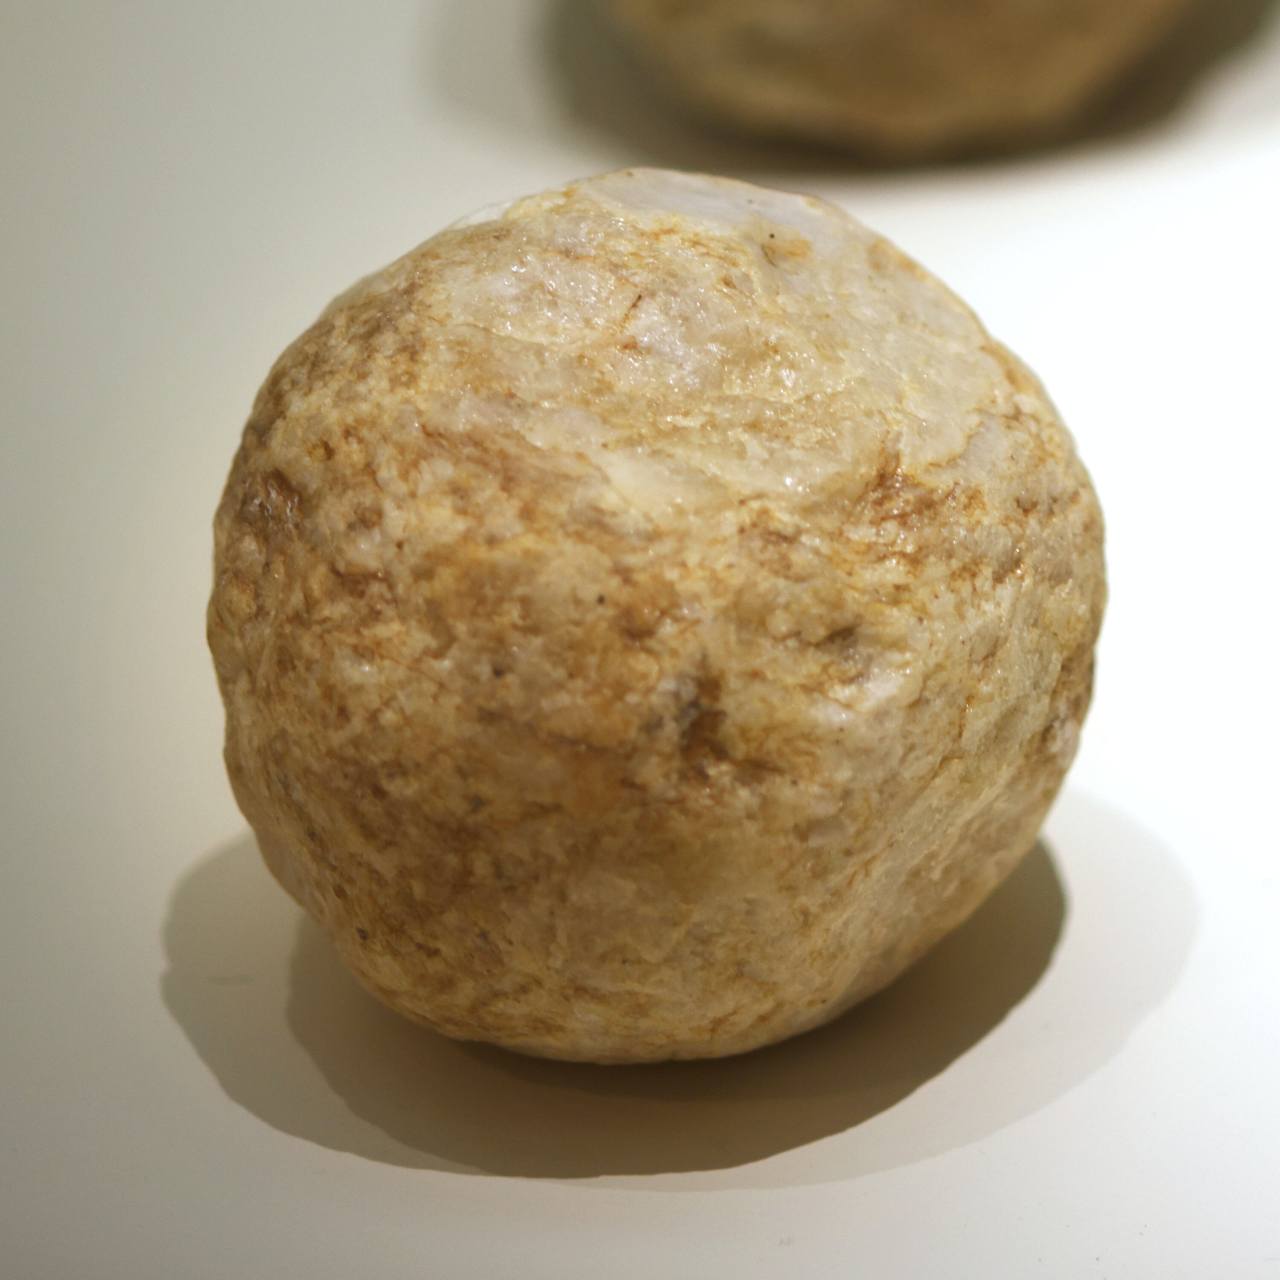 A baseball-sized highly weathered and used hammer stone, used to make handaxe by chipping the stone, also called a spherical polyhedron-bola, from the Stone Age is on display at the National Museum of Jeonju in Korea. It was discovered in Samgil-ri in Imsil-gun, North Jeolla province. Photo © Hyungwon Kang